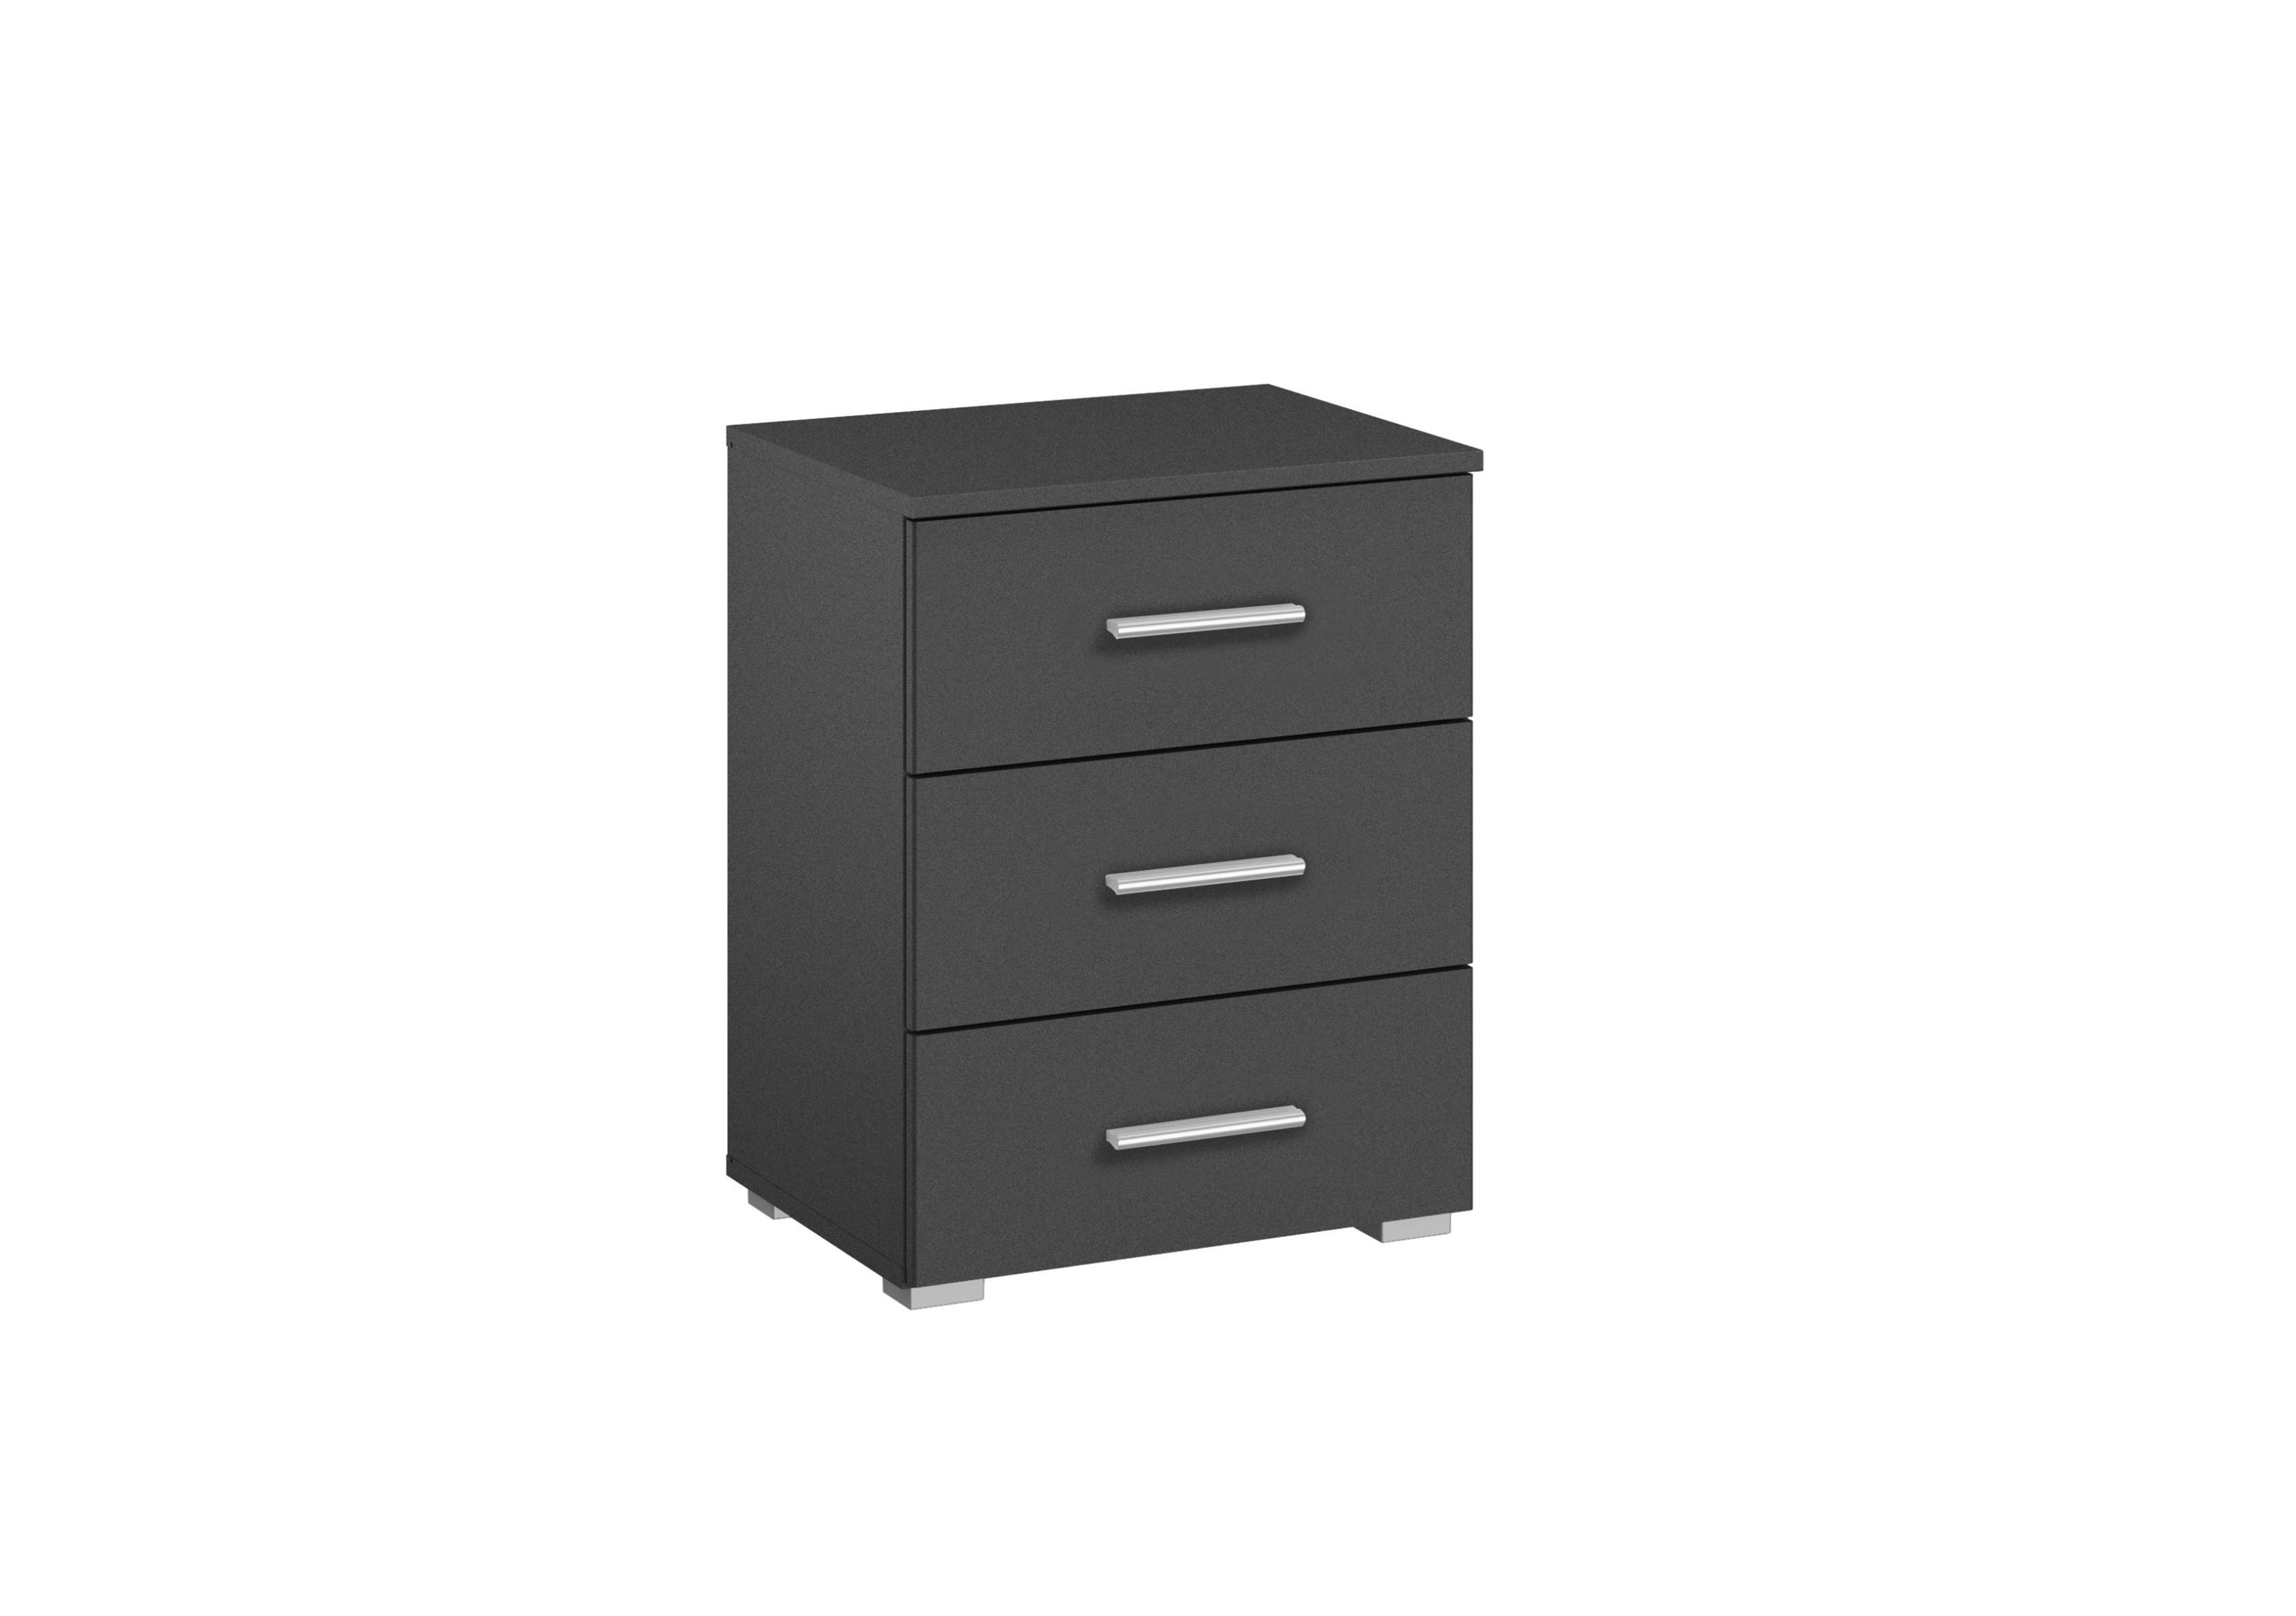 Solo 3 Drawer Bedside Chest in Ap849 Metallic Grey on Furniture Village